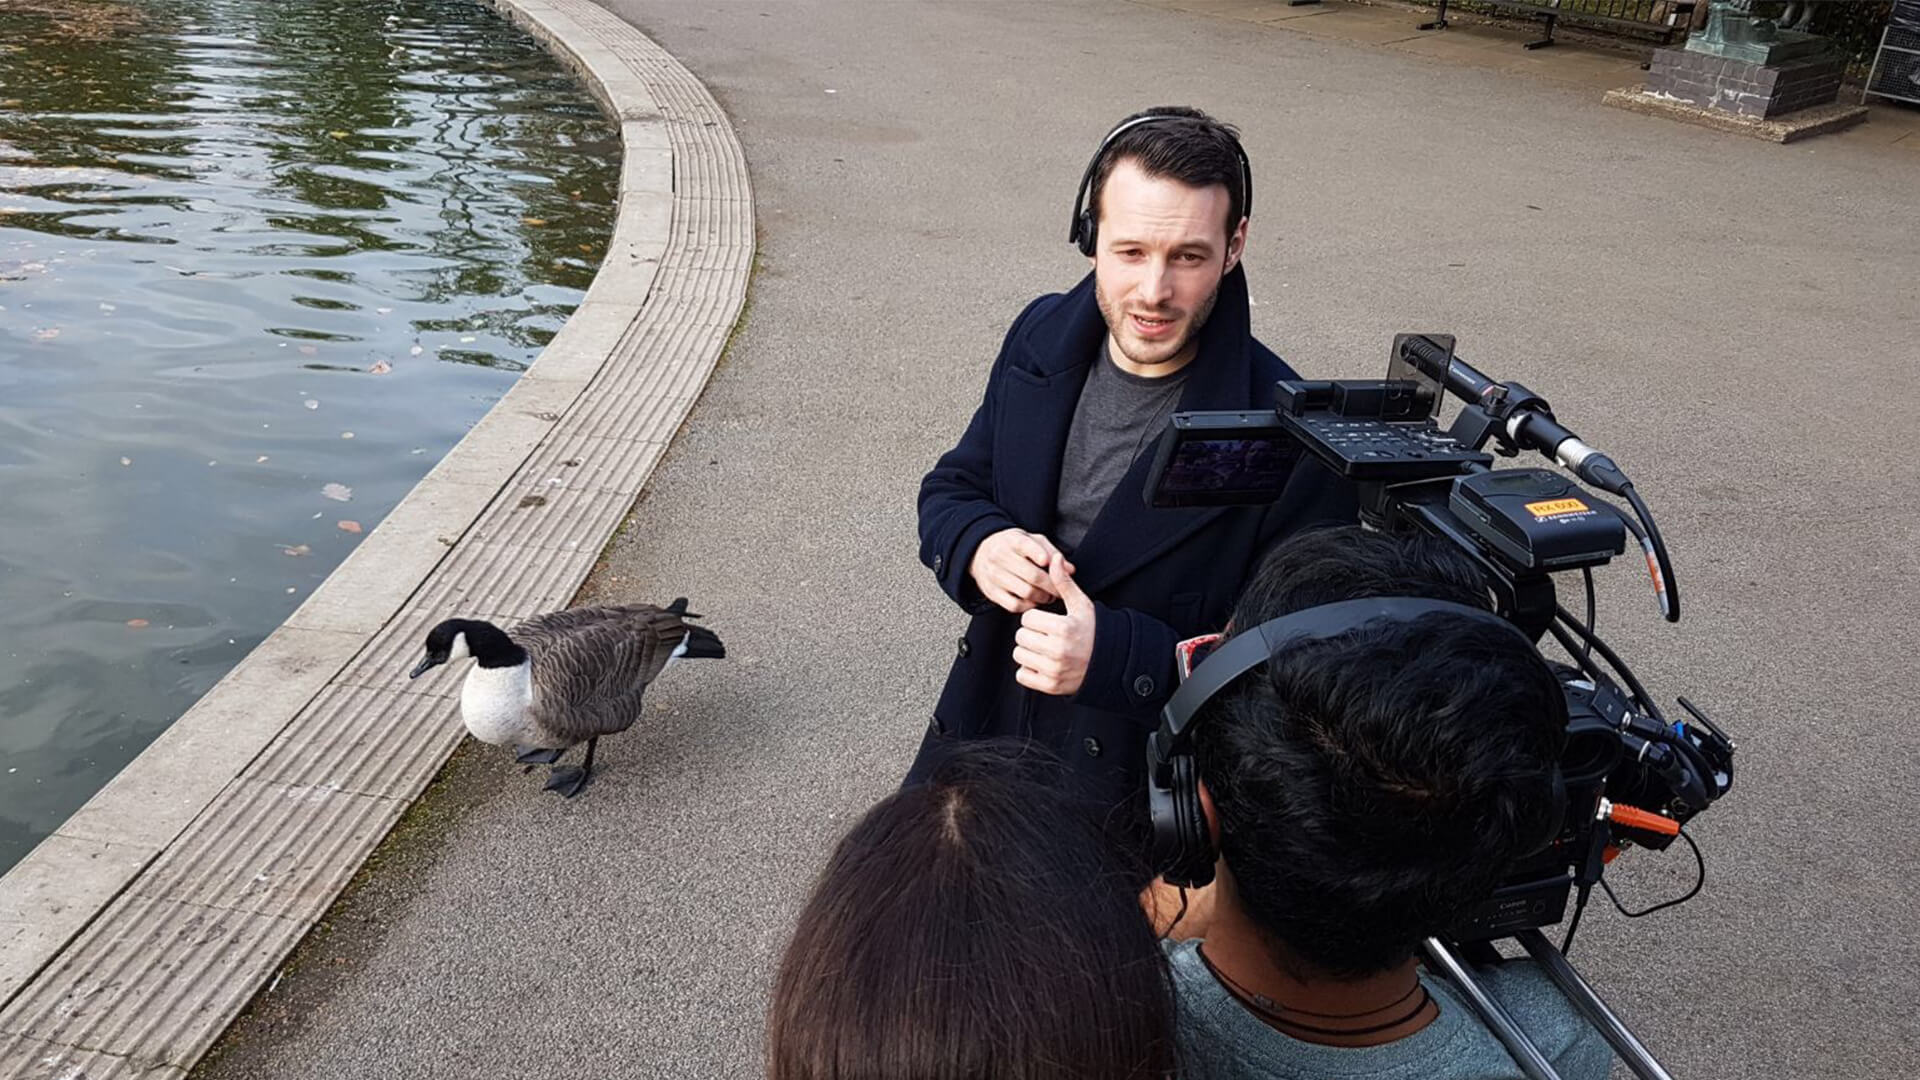 e4 presenter aaron calvert being interviewed about hypnosis project by a pond about stage entertainment